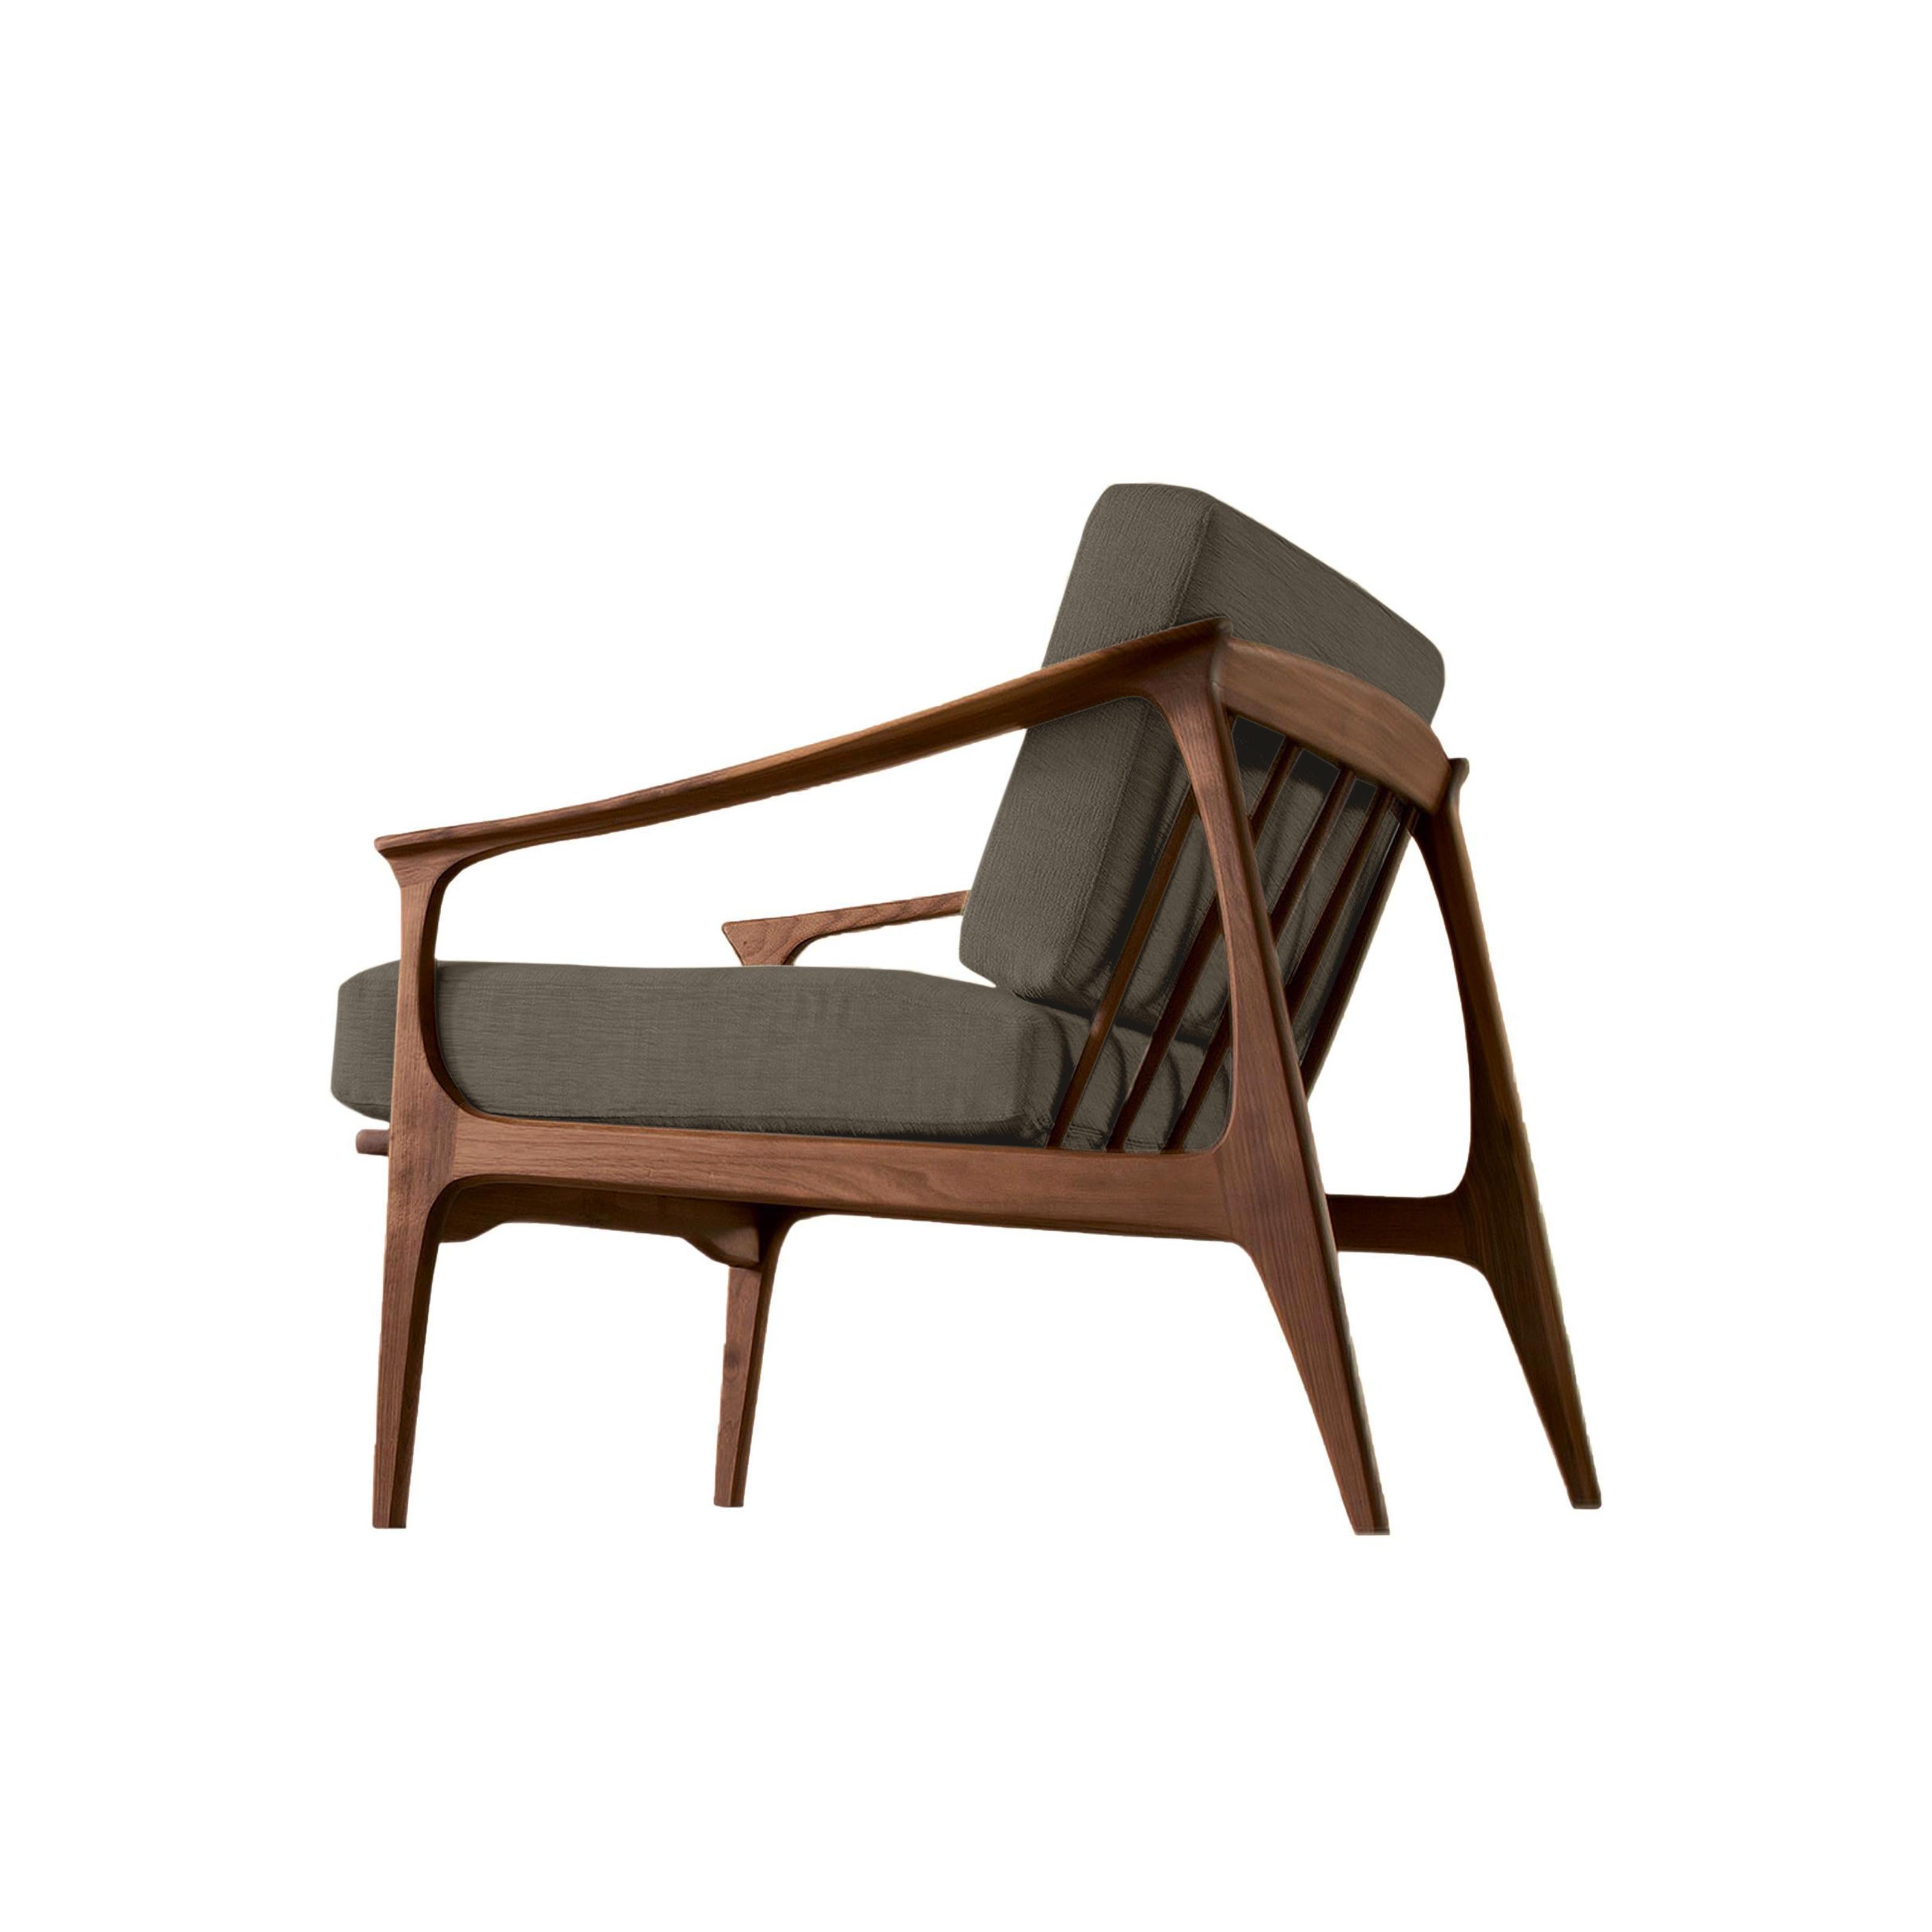 Italian Quiete Solid Wood Armchair, Walnut in Hand-Made Natural Finish, Contemporary For Sale